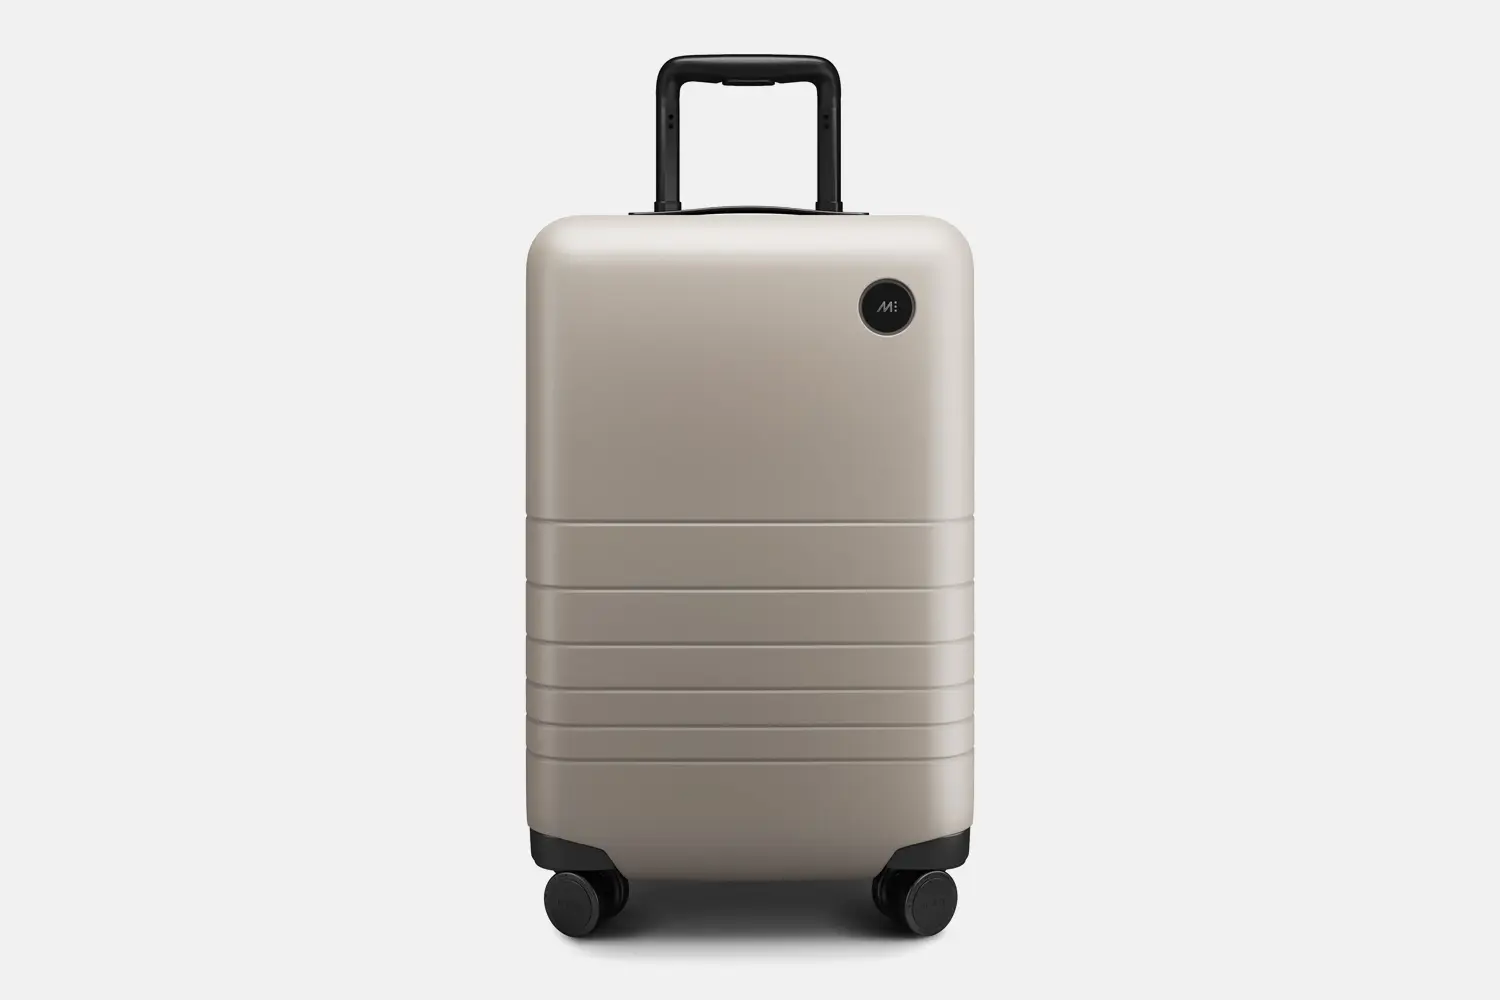 Monos Carry-on Luggage